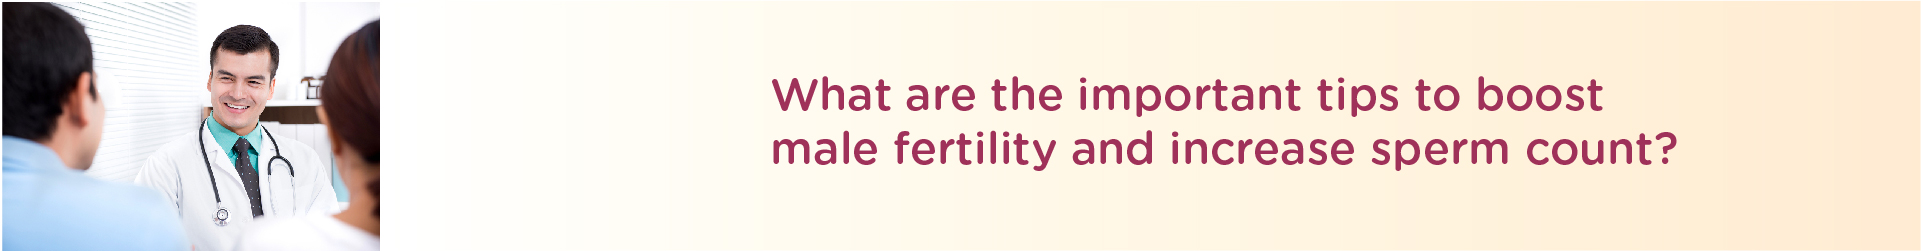 What are the important tips to Boost Male Fertility and Increase Sperm Count?